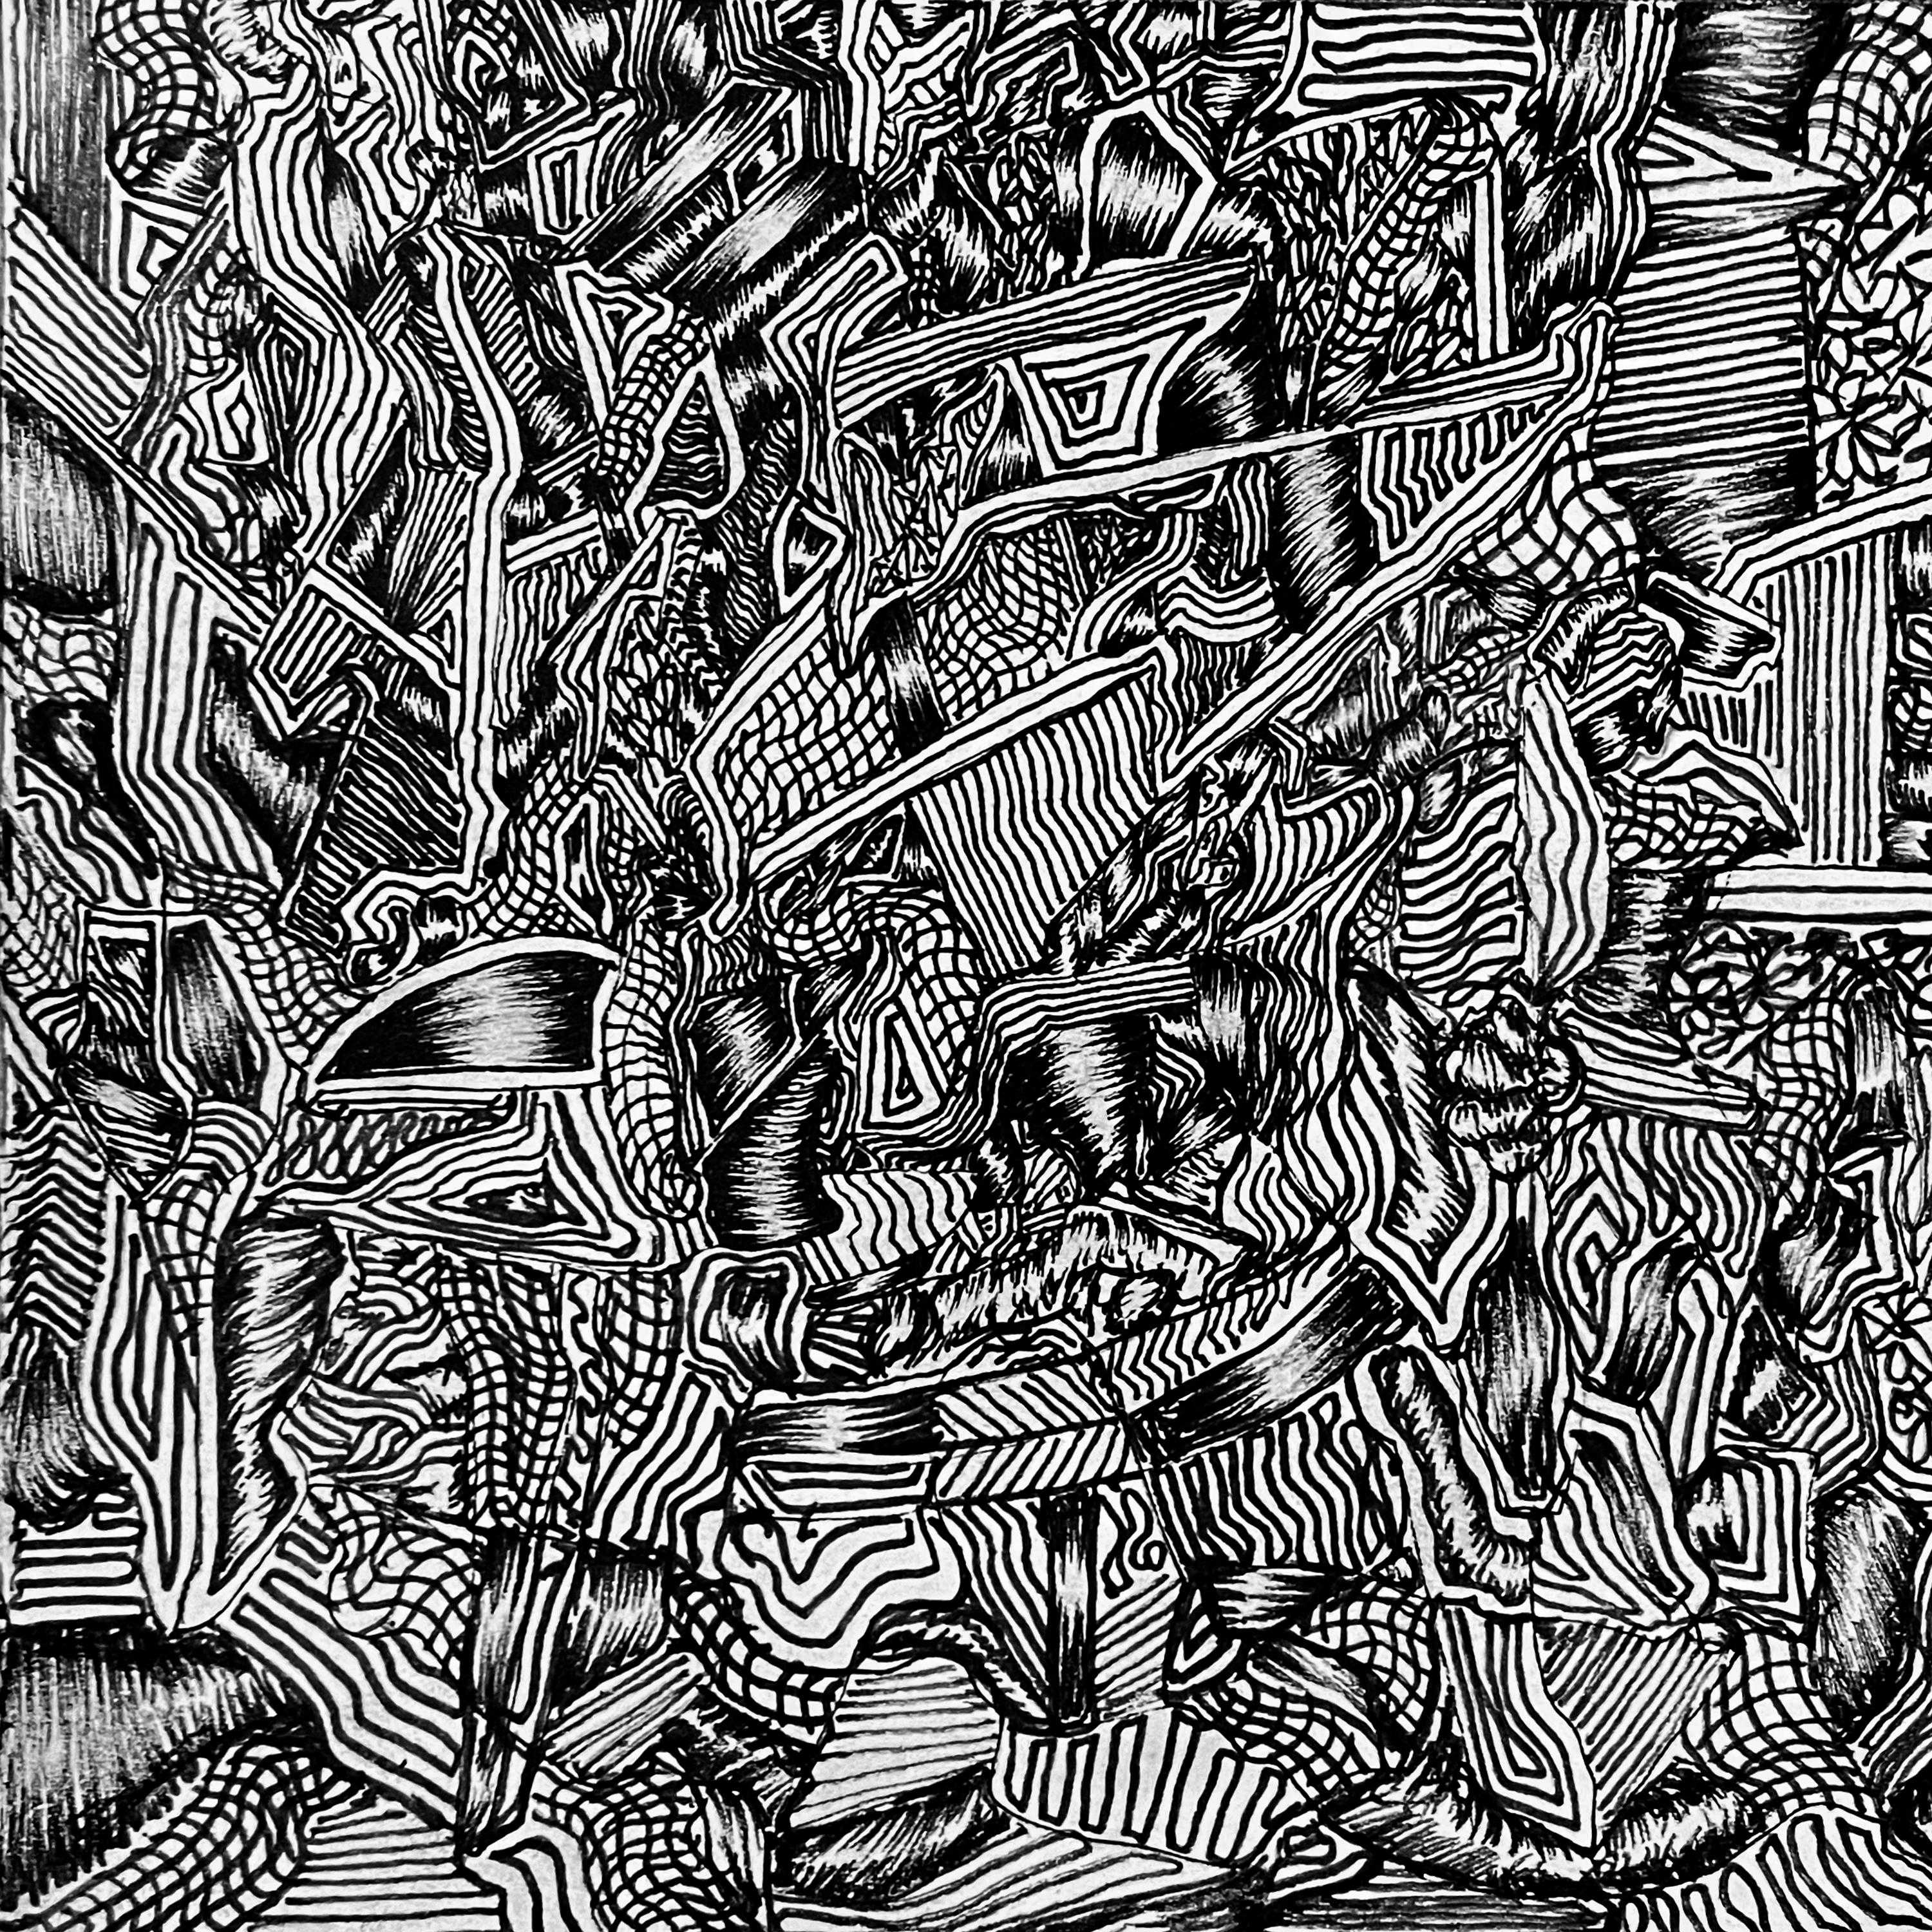 Ink on paper

David Paul Kay is an American contemporary artist born in 1982 who lives and works in New York City, USA. With a focus on vibrant lines and intricate compositions, Kay creates captivating narratives on blank surfaces. His obsession